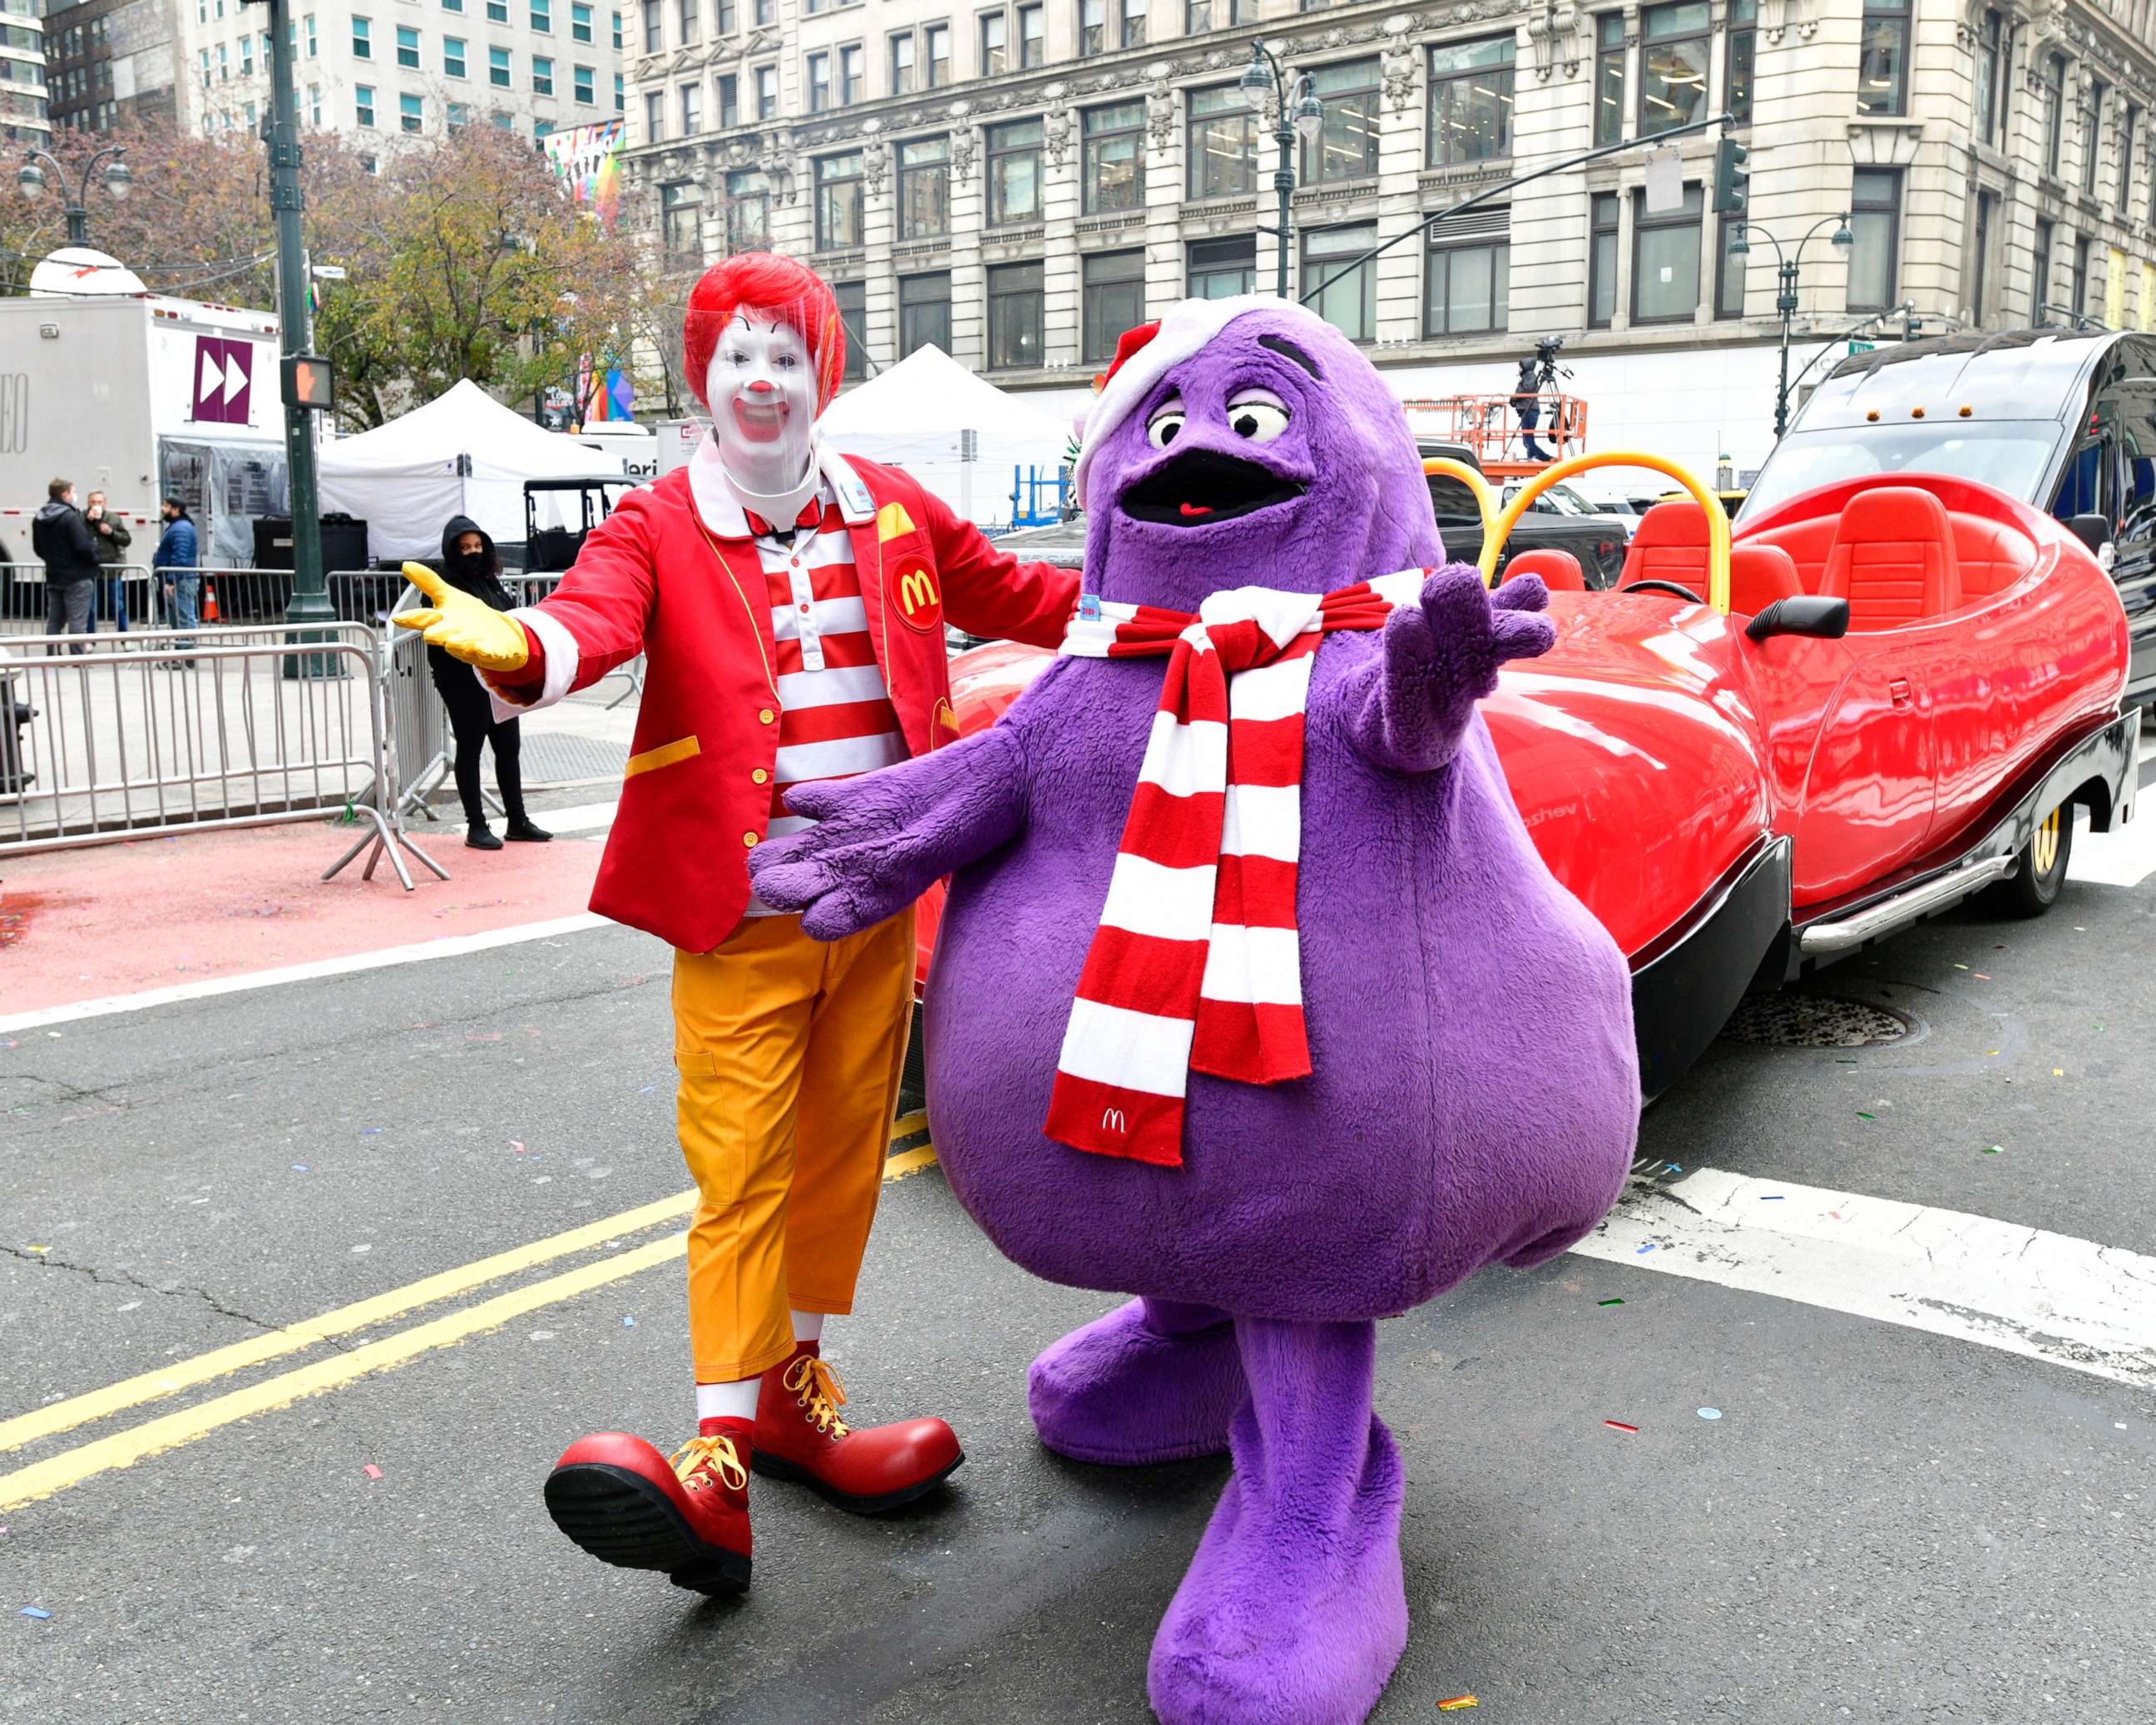 PHOTO: In this Nov. 24, 2020, file photo, Ronald McDonald and Grimace appear in the 94th Annual Macy's Thanksgiving Day Parade in New York.